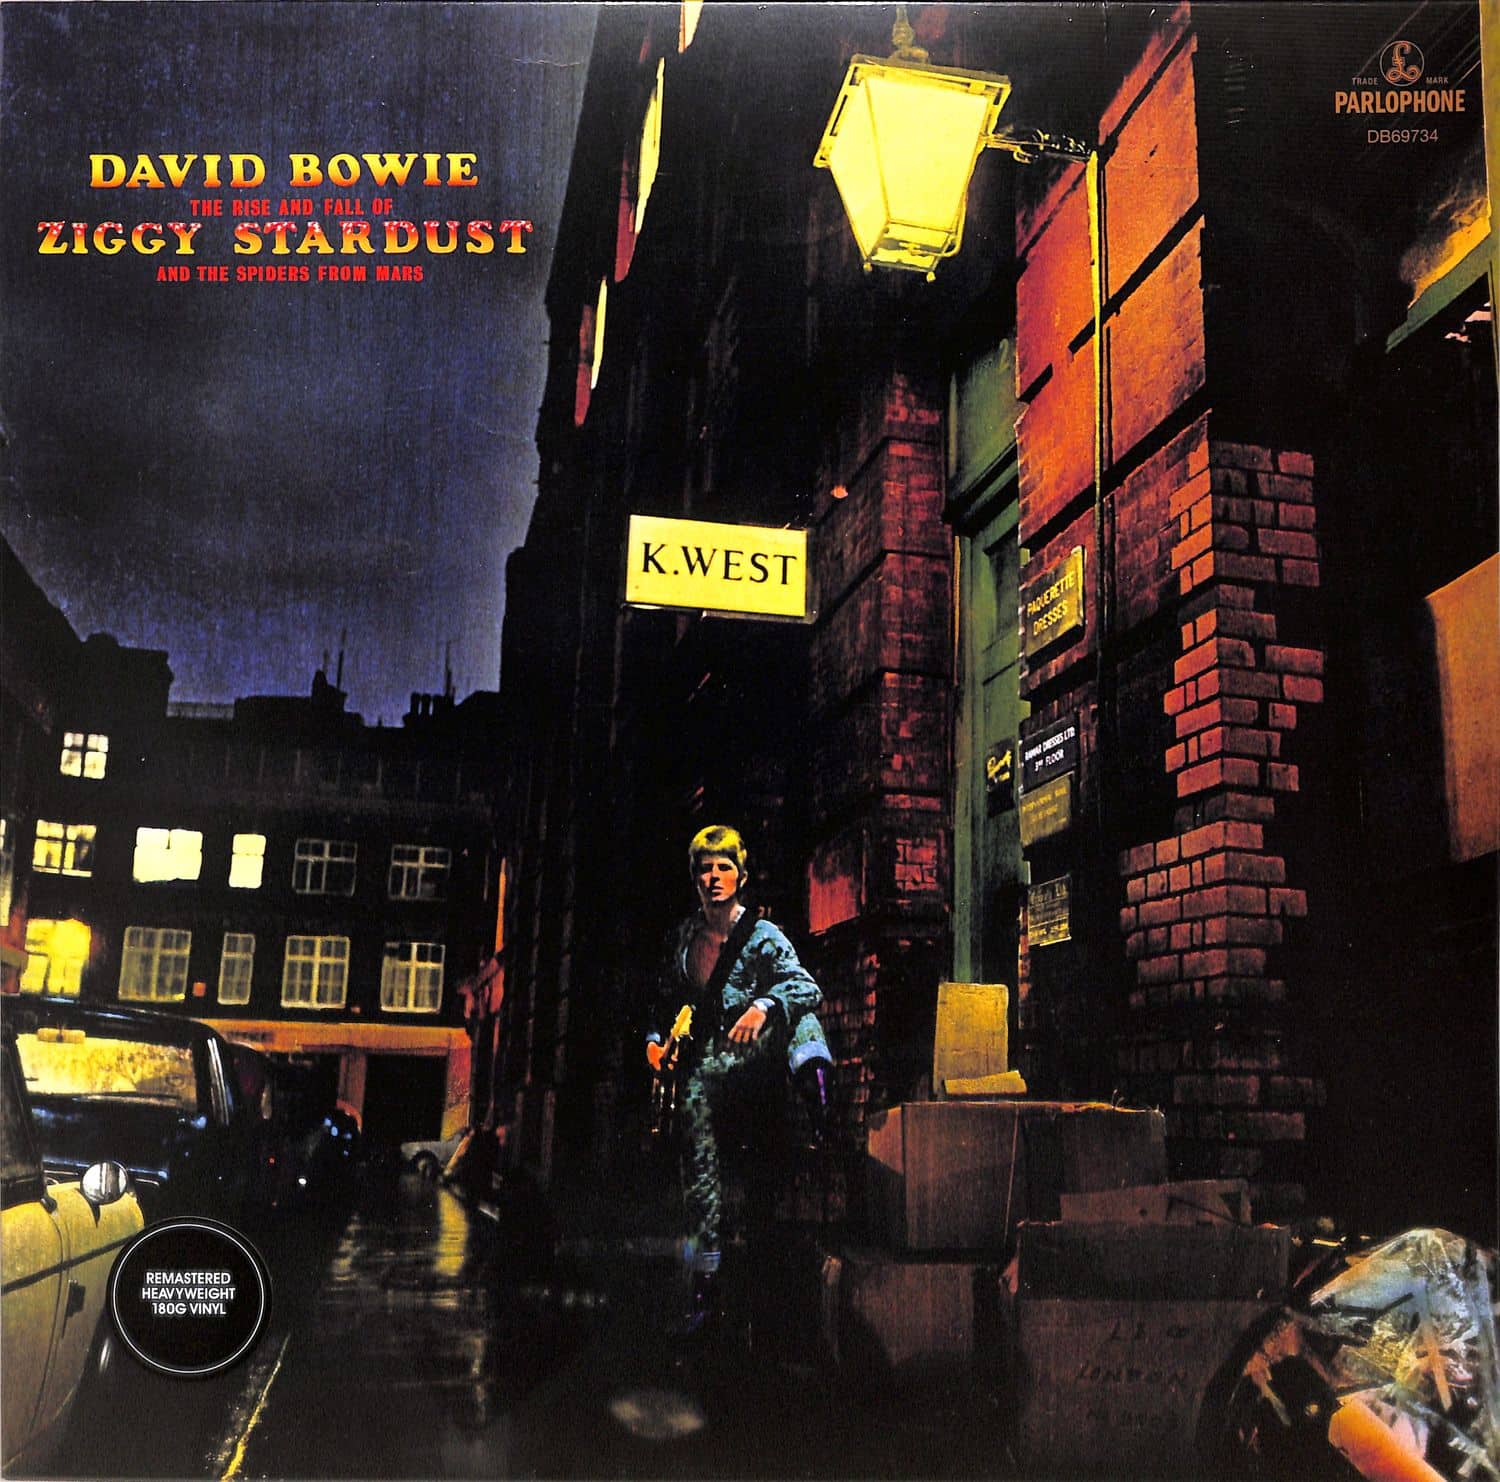 David Bowie - THE RISE AND FALL OF ZIGGY STARDUST AND THE SPIDERS FROM MARS 